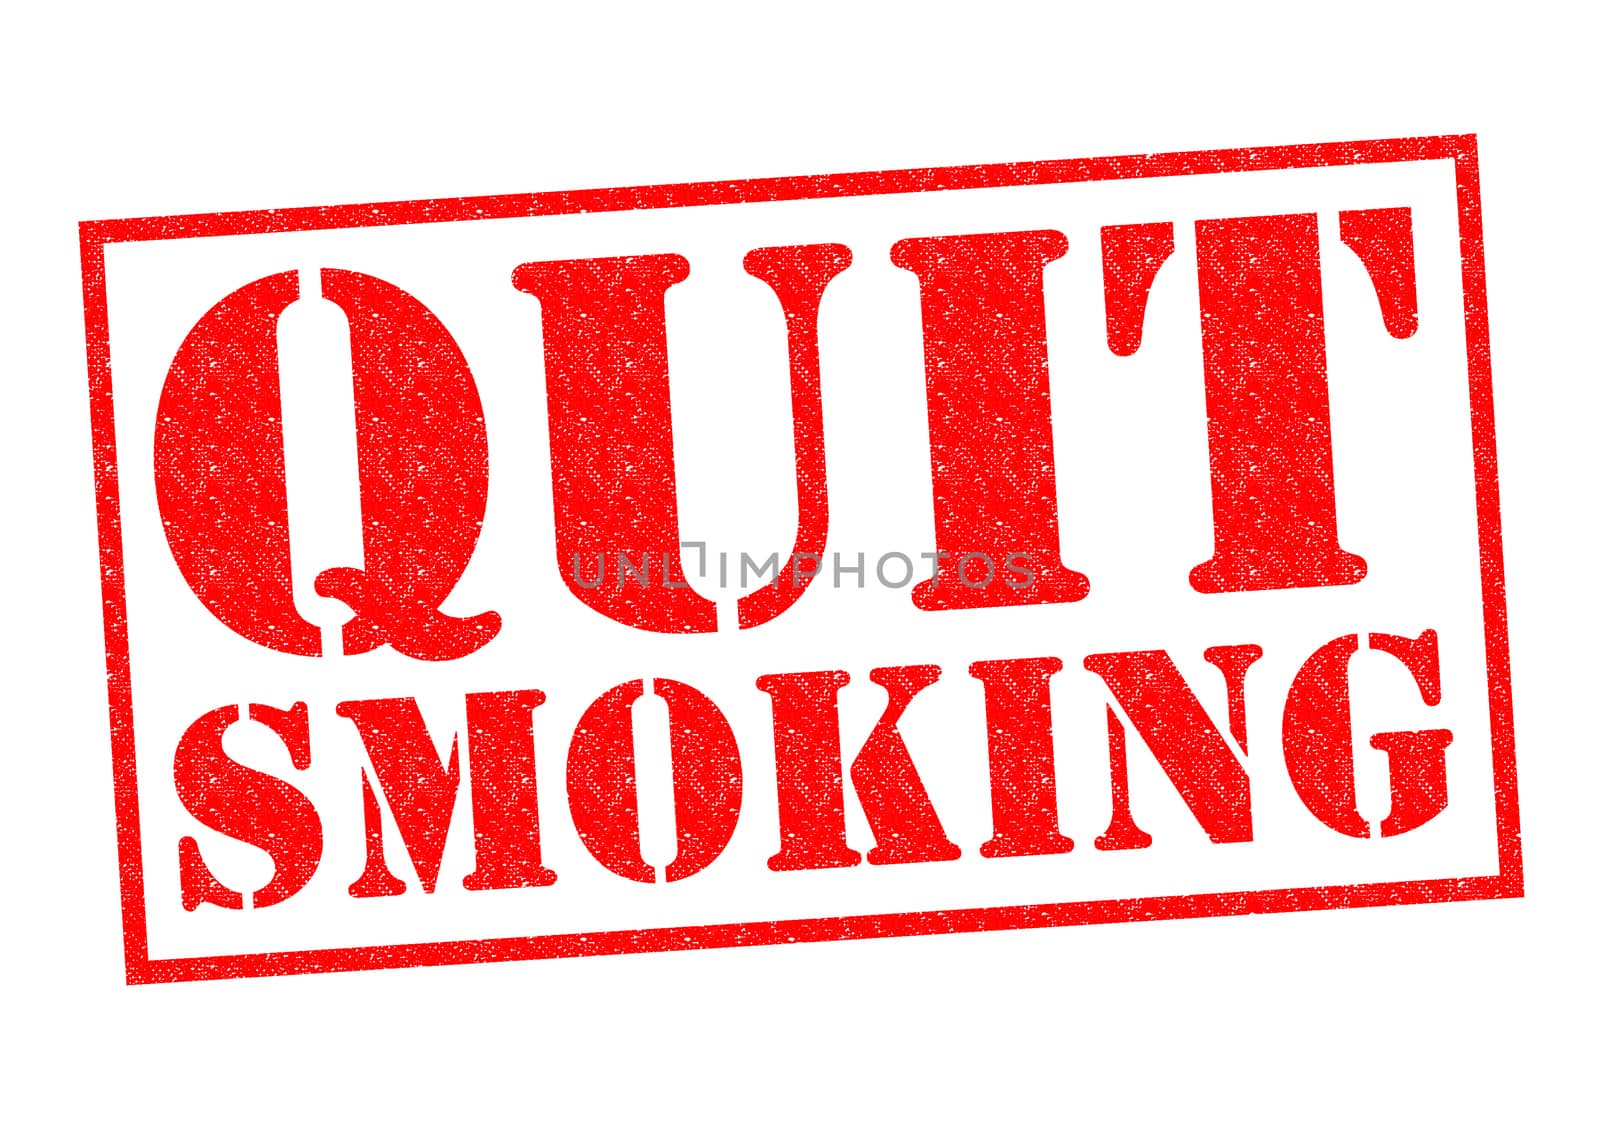 QUIT SMOKING red Rubber Stamp over a white background.